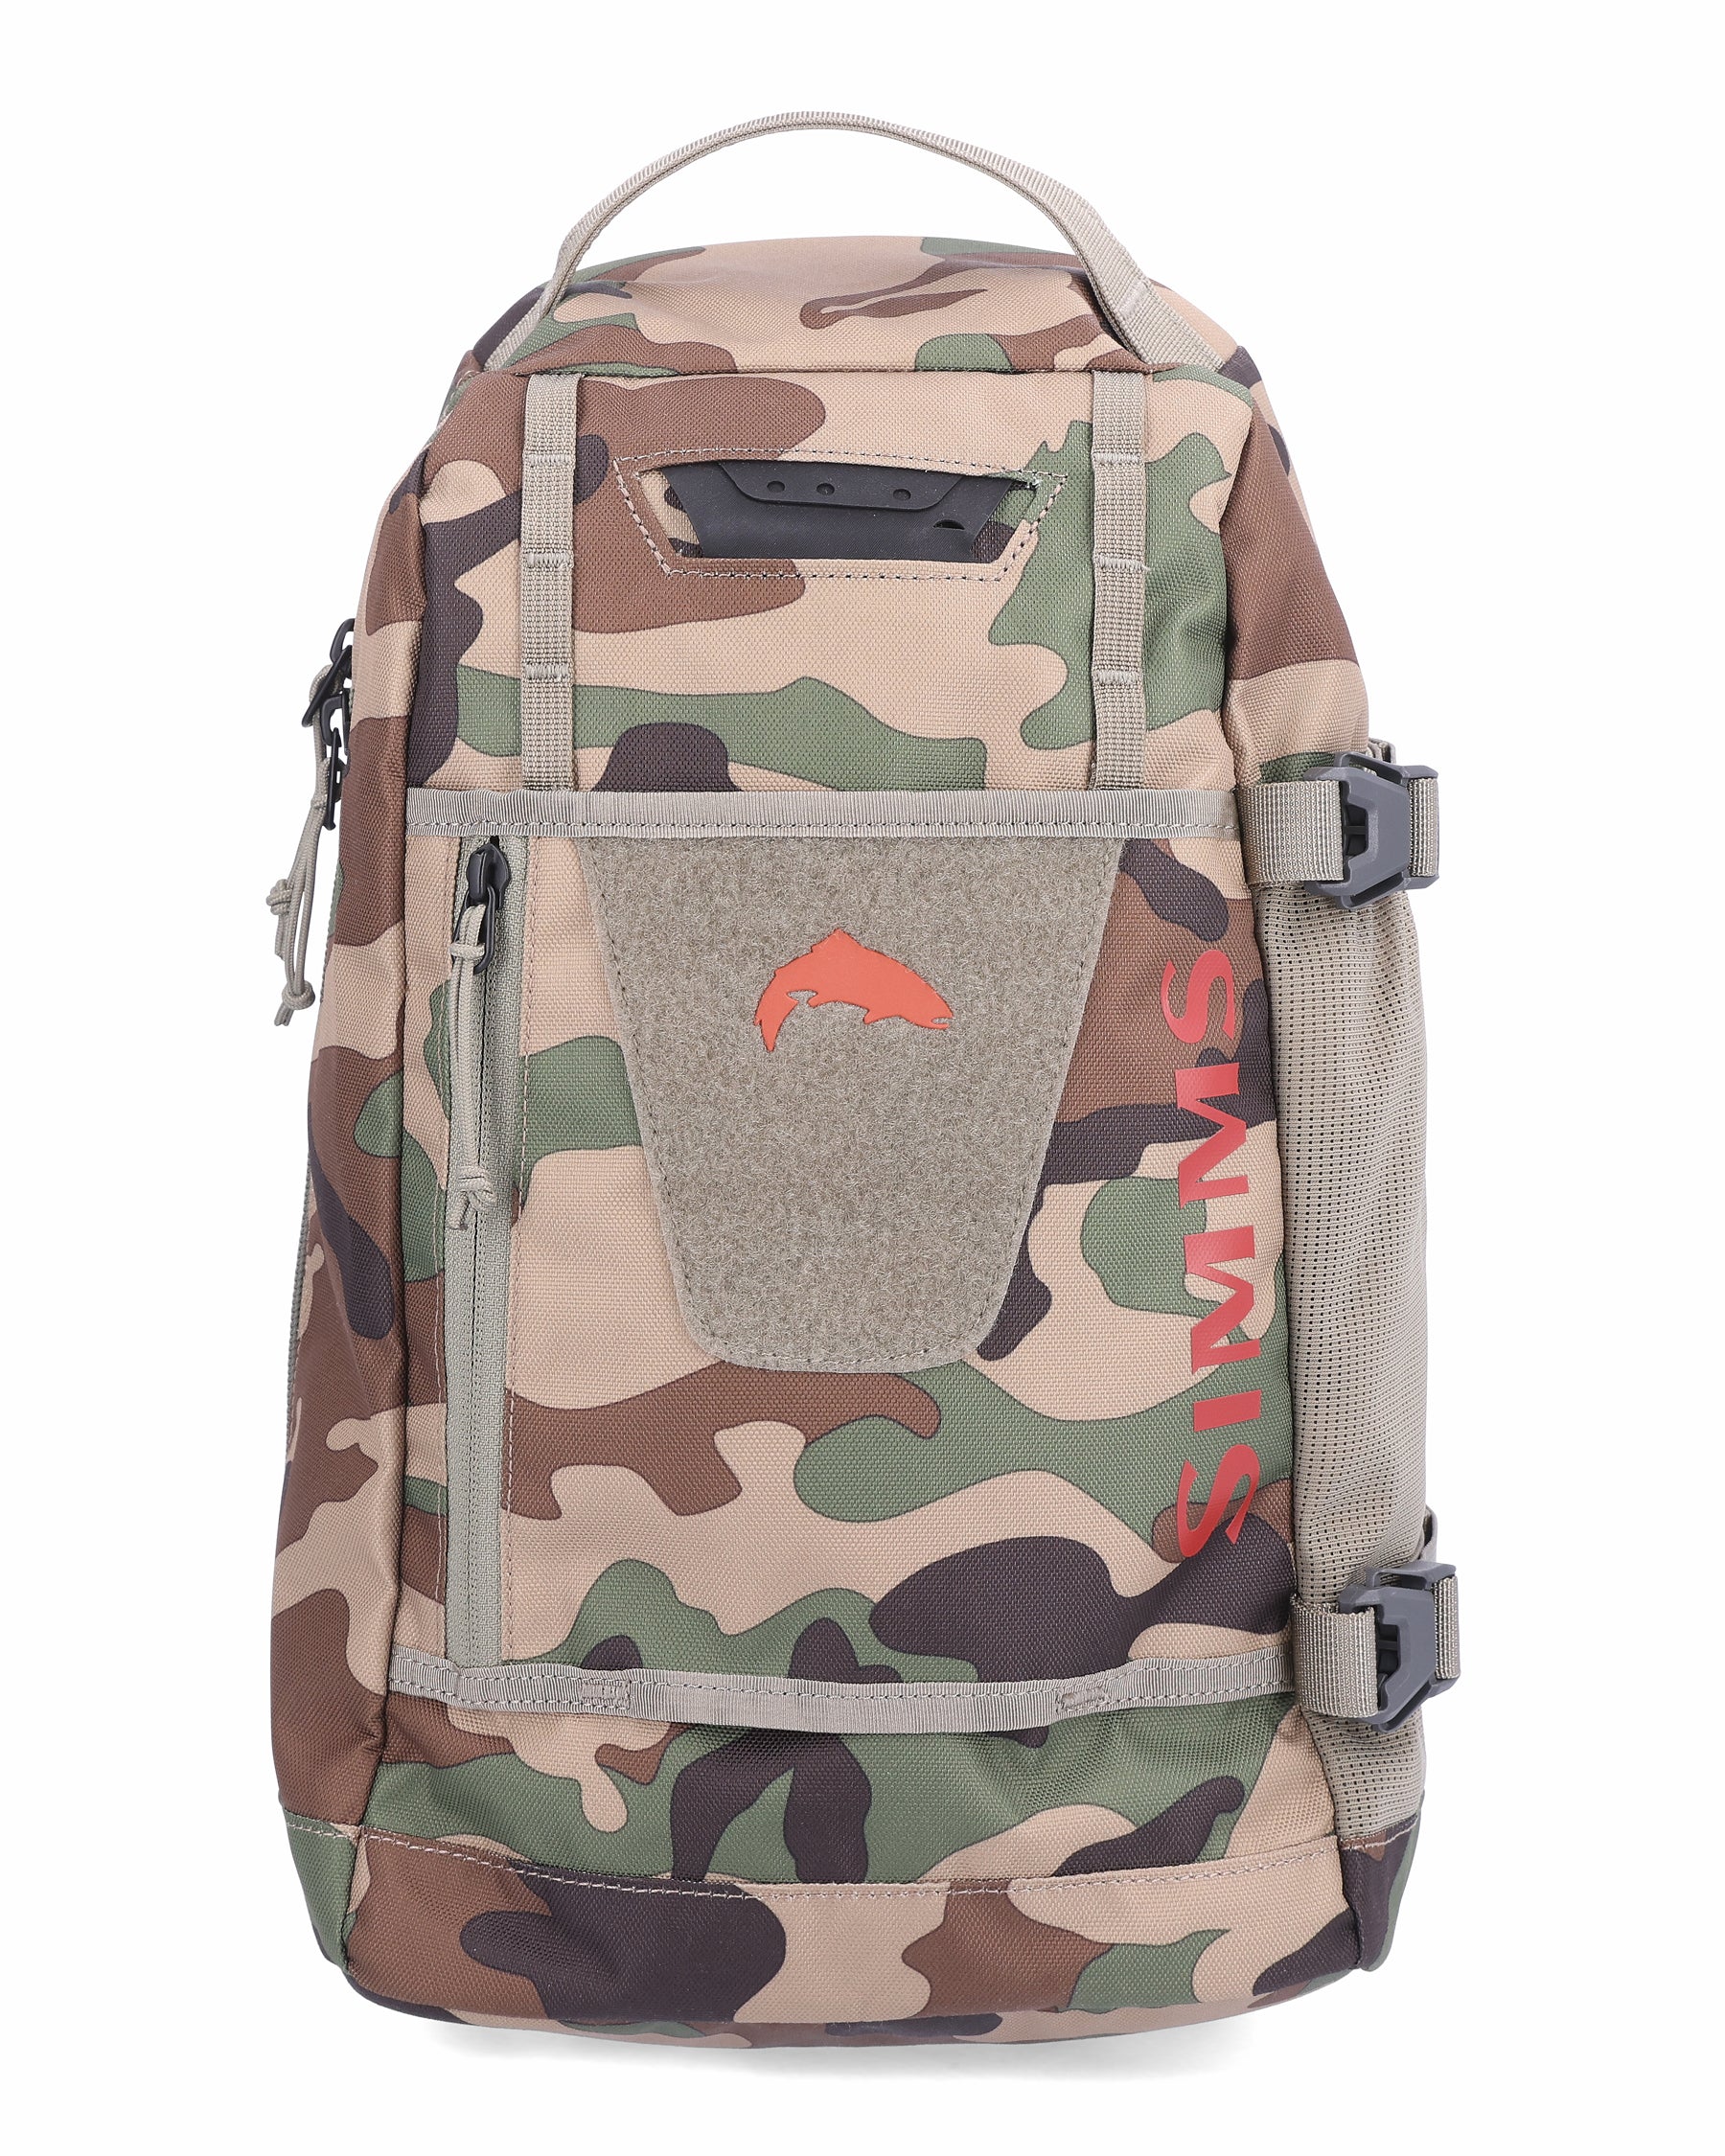 Simms Tributary Sling Pack 10L